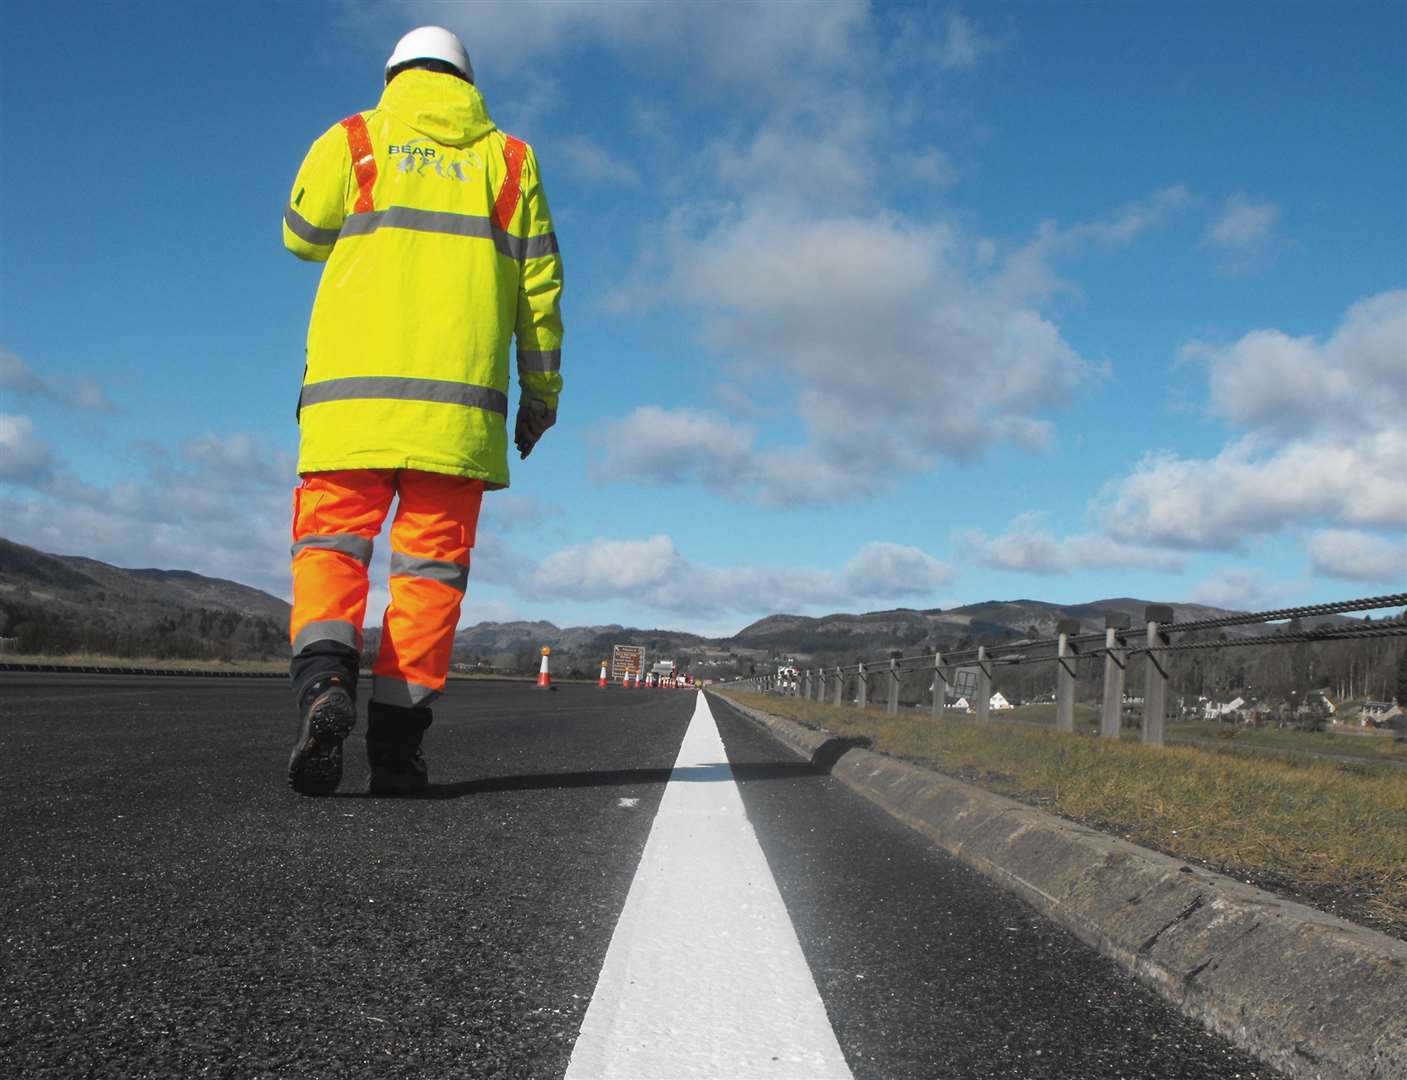 A new survey has revealed the impact of physical and verbal abuse on roadworkers.